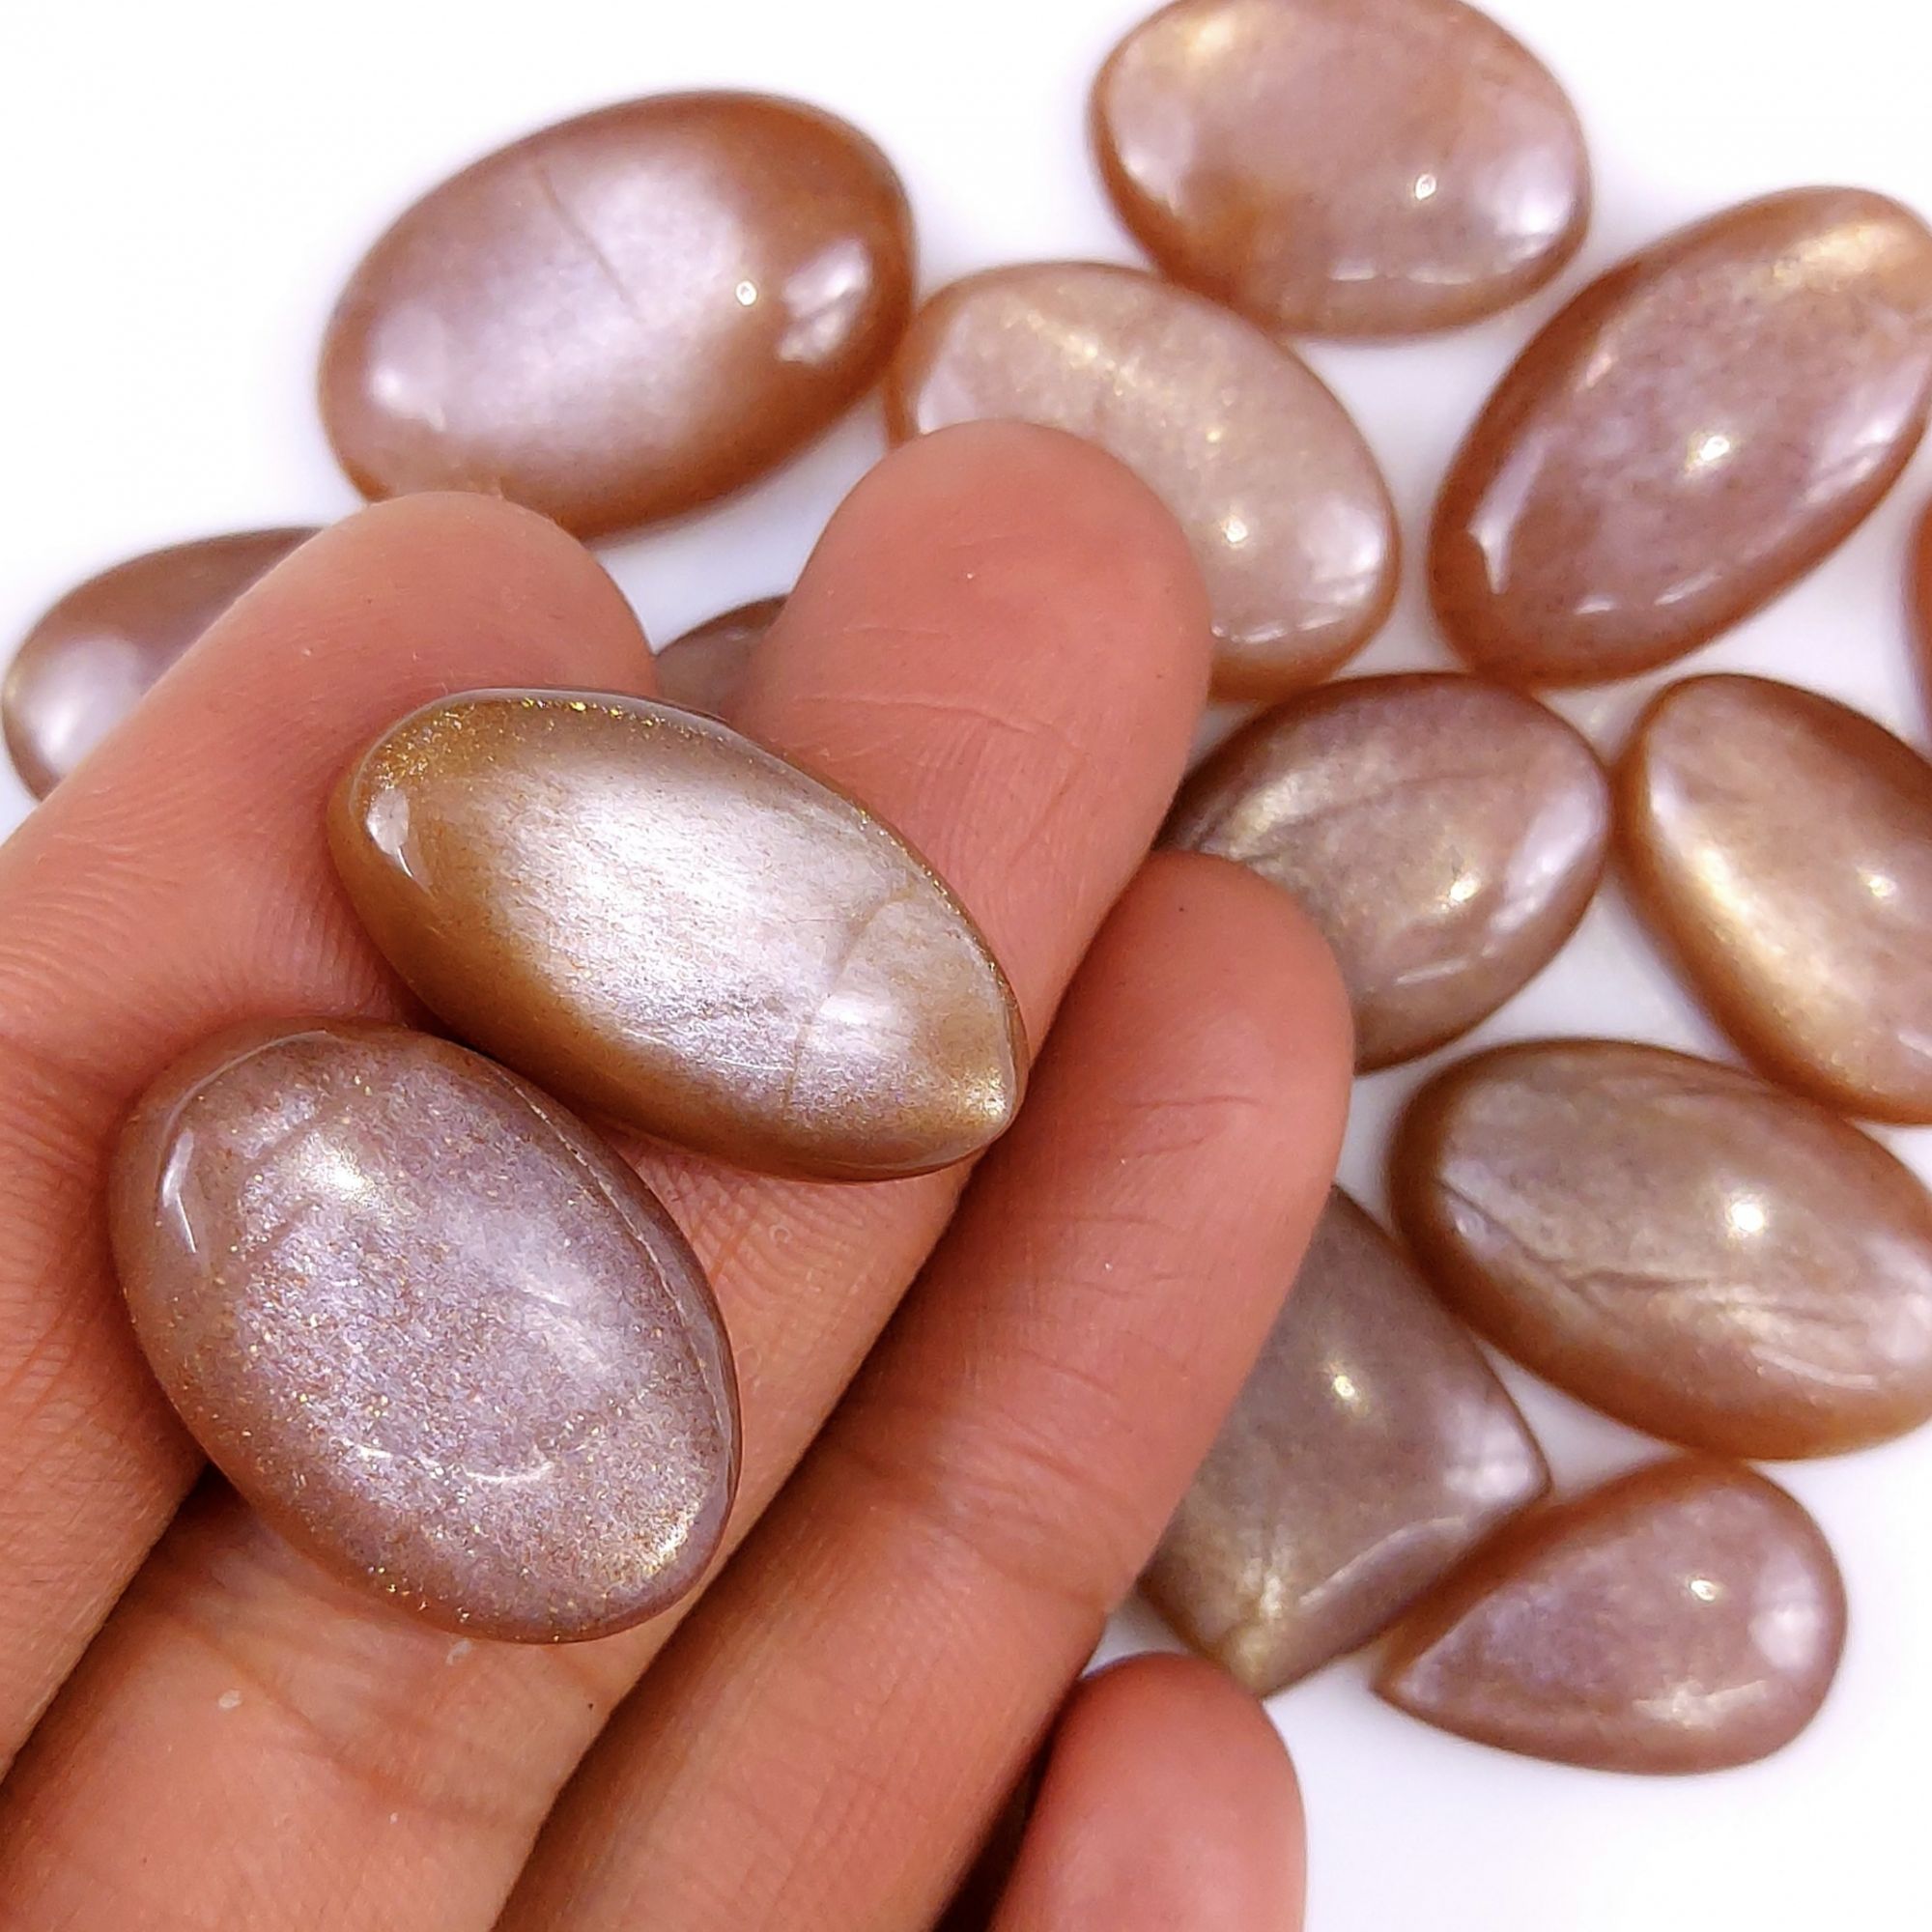 18Pcs 327Cts Natural Peach Moonstone Cabochon lot Gemstone Crystal Mix Shape Loose Gemstone beads for jewelry Making 24x14 15x12mm